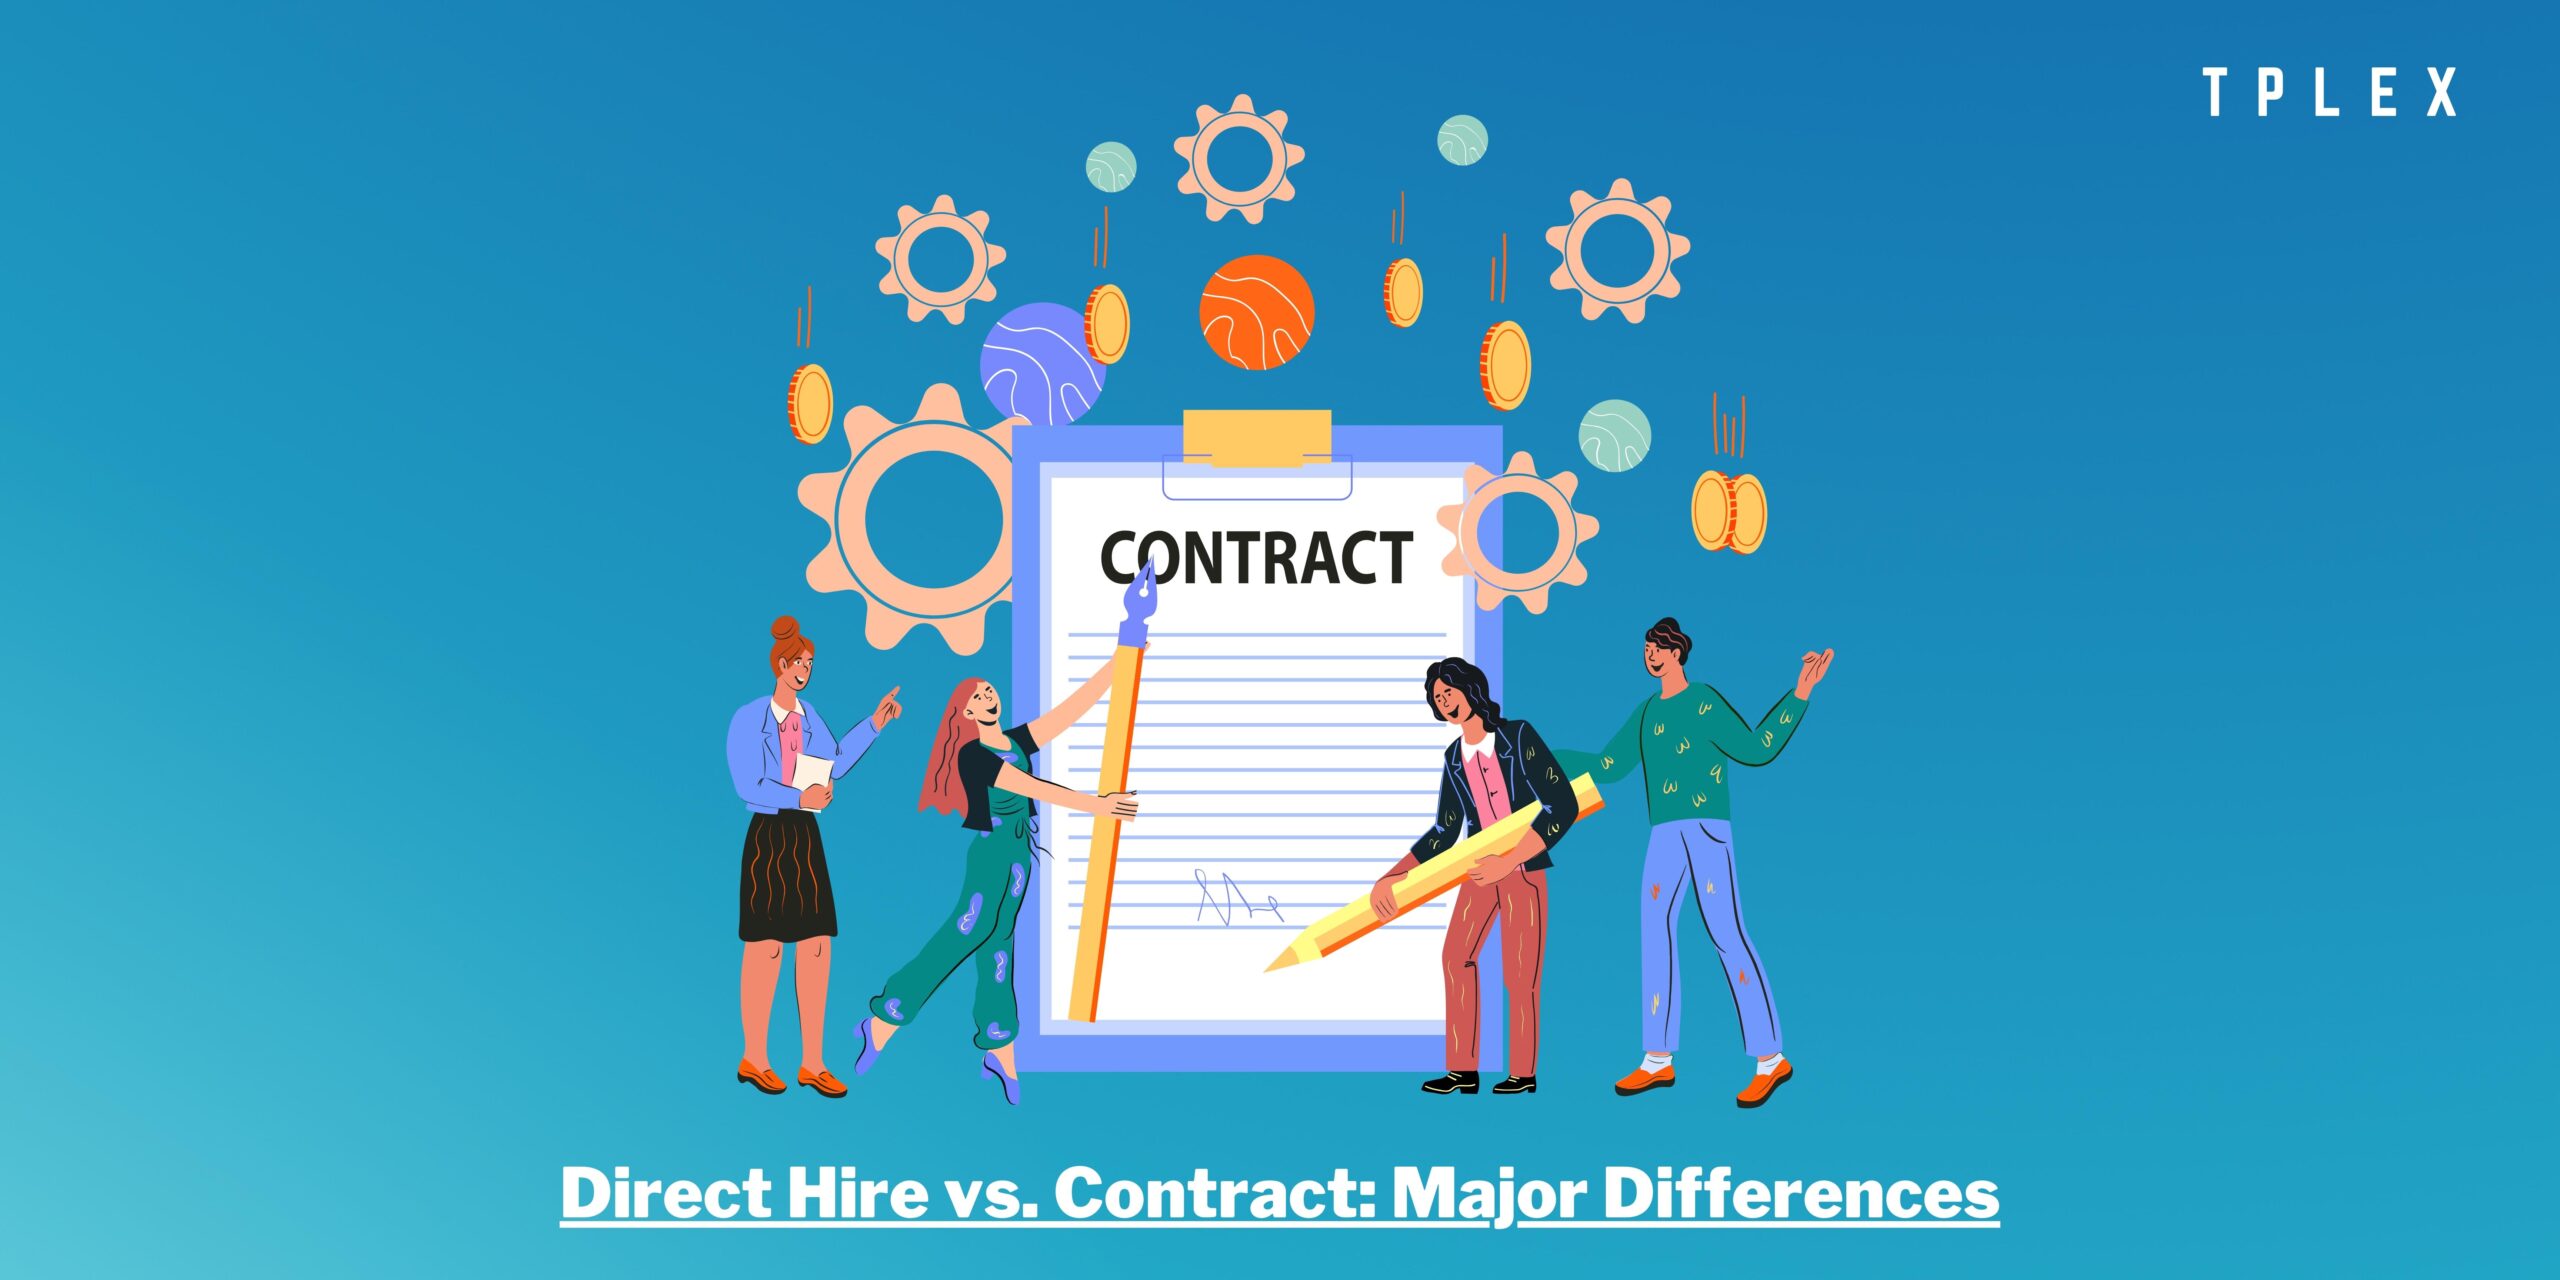 Direct Hire vs. Contract: Major Differences